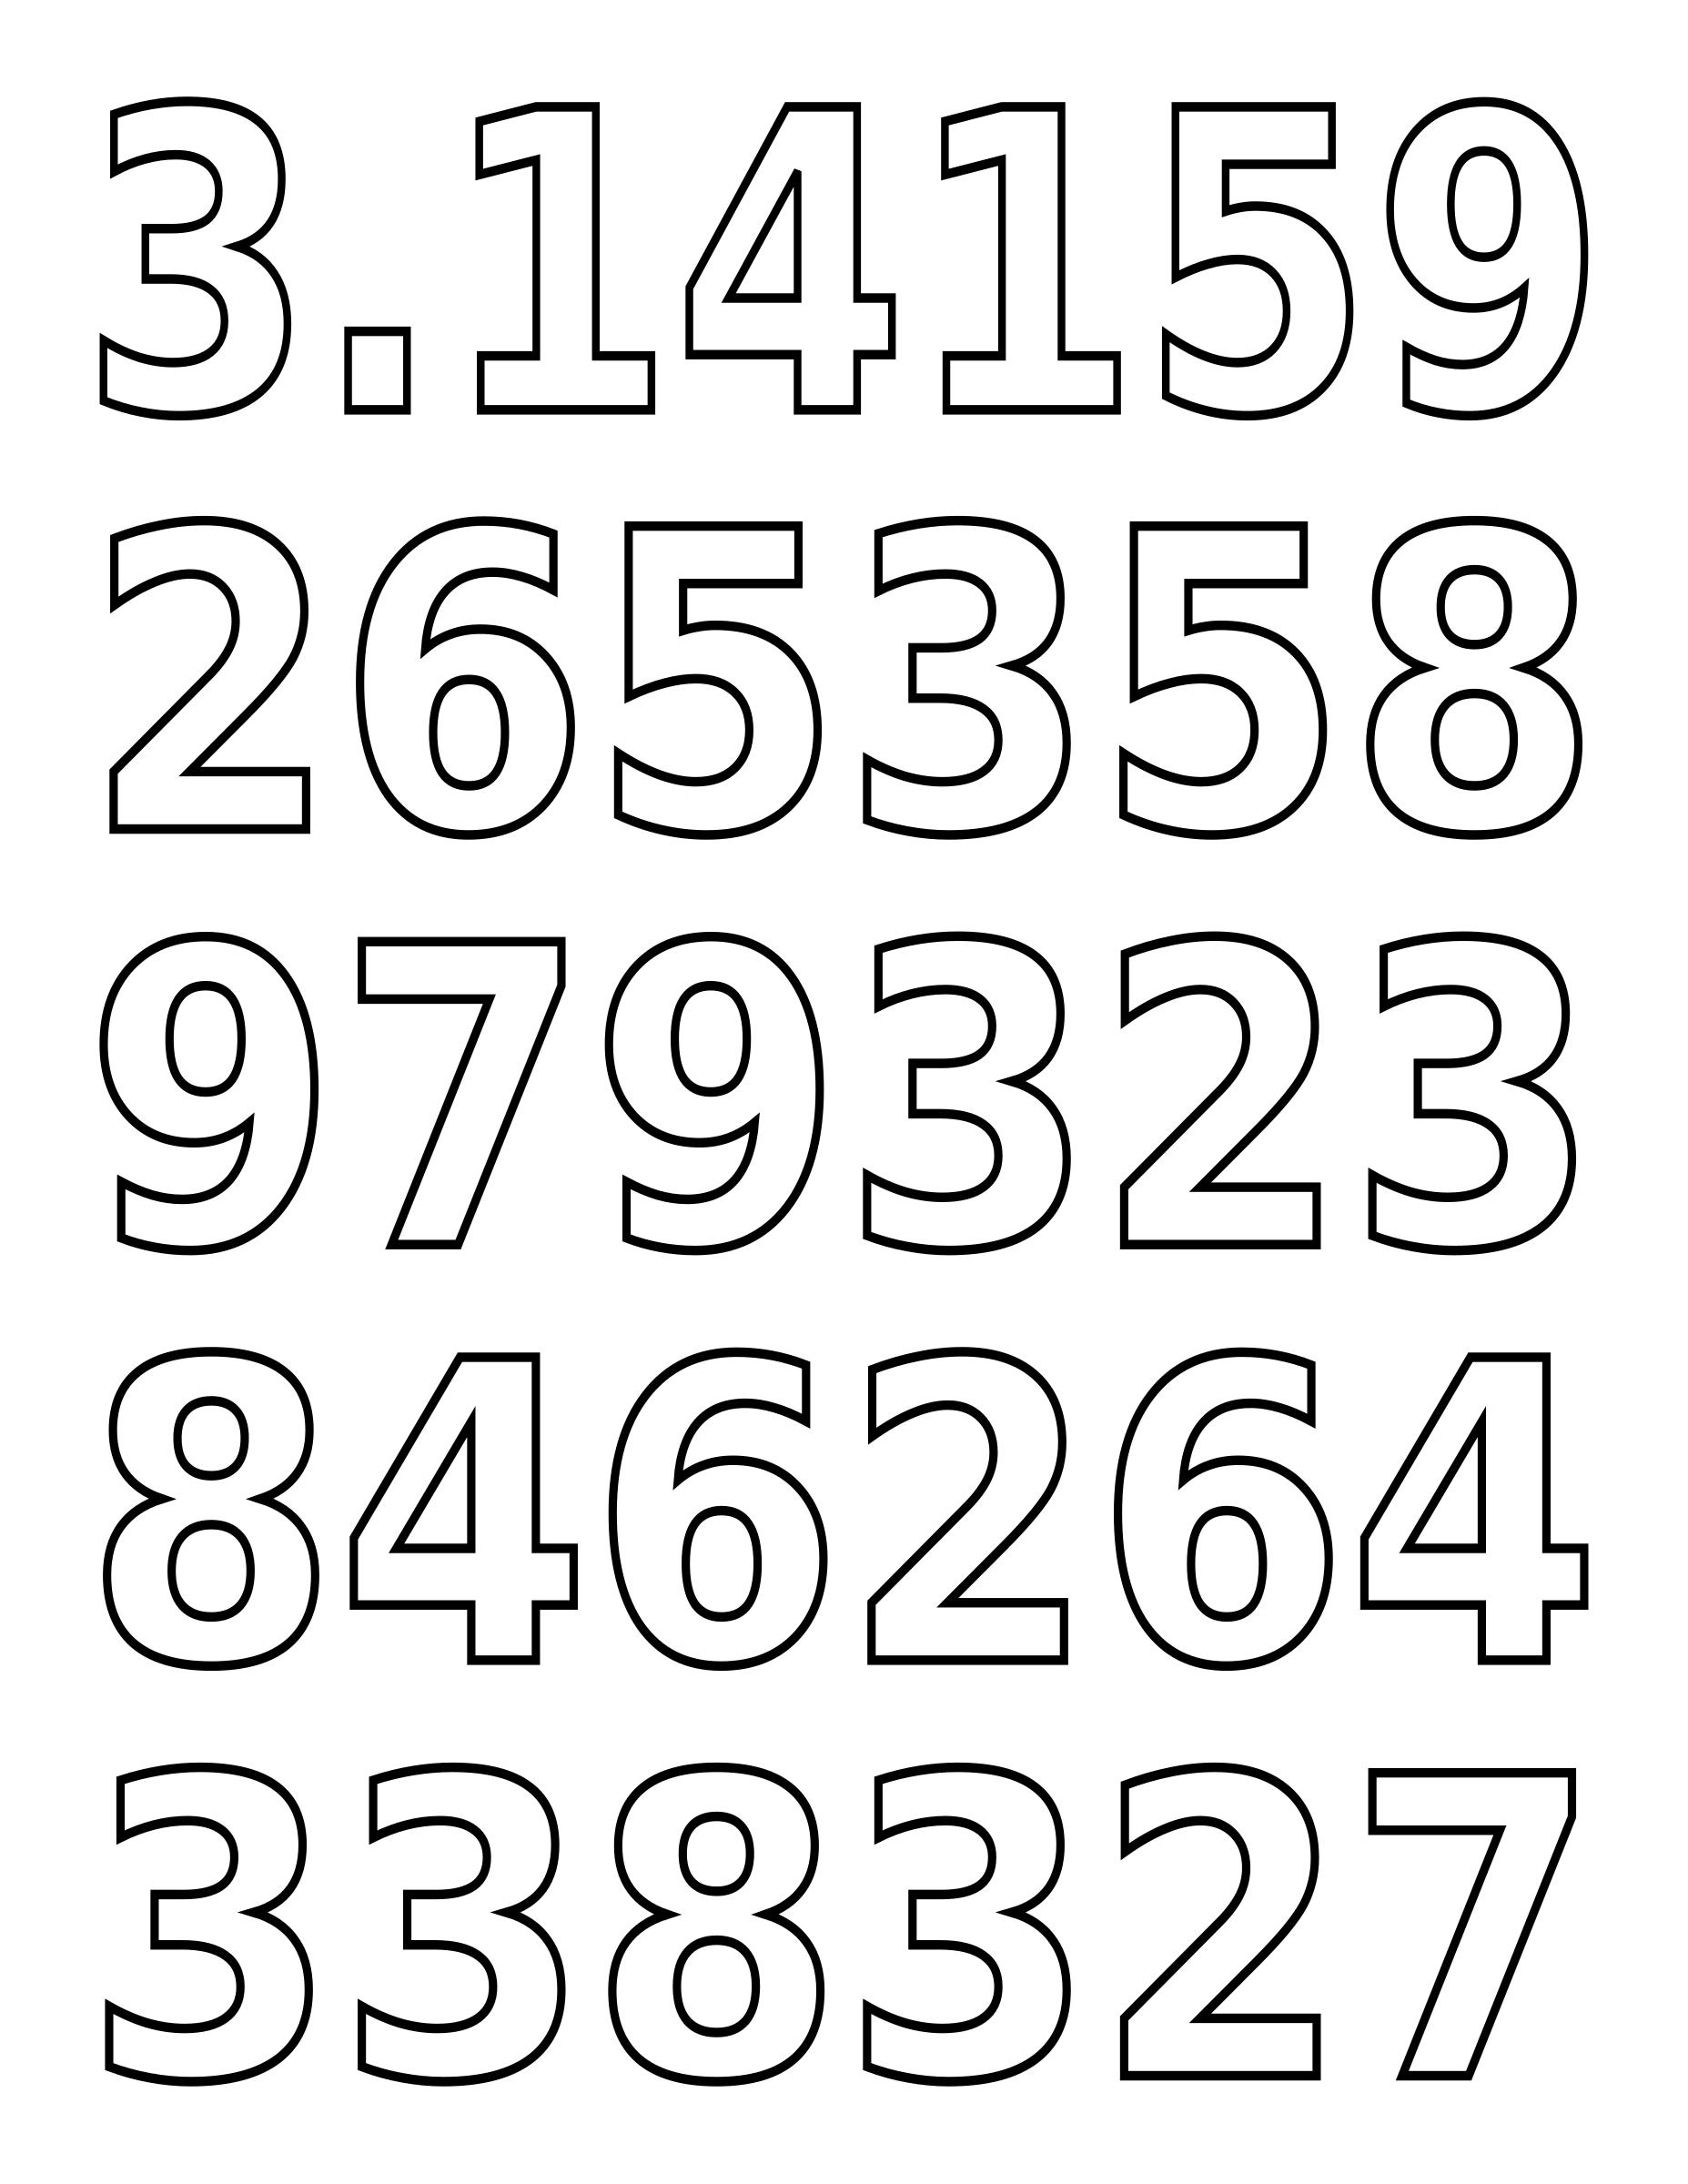 Coloring page - pi day digits of pi large png